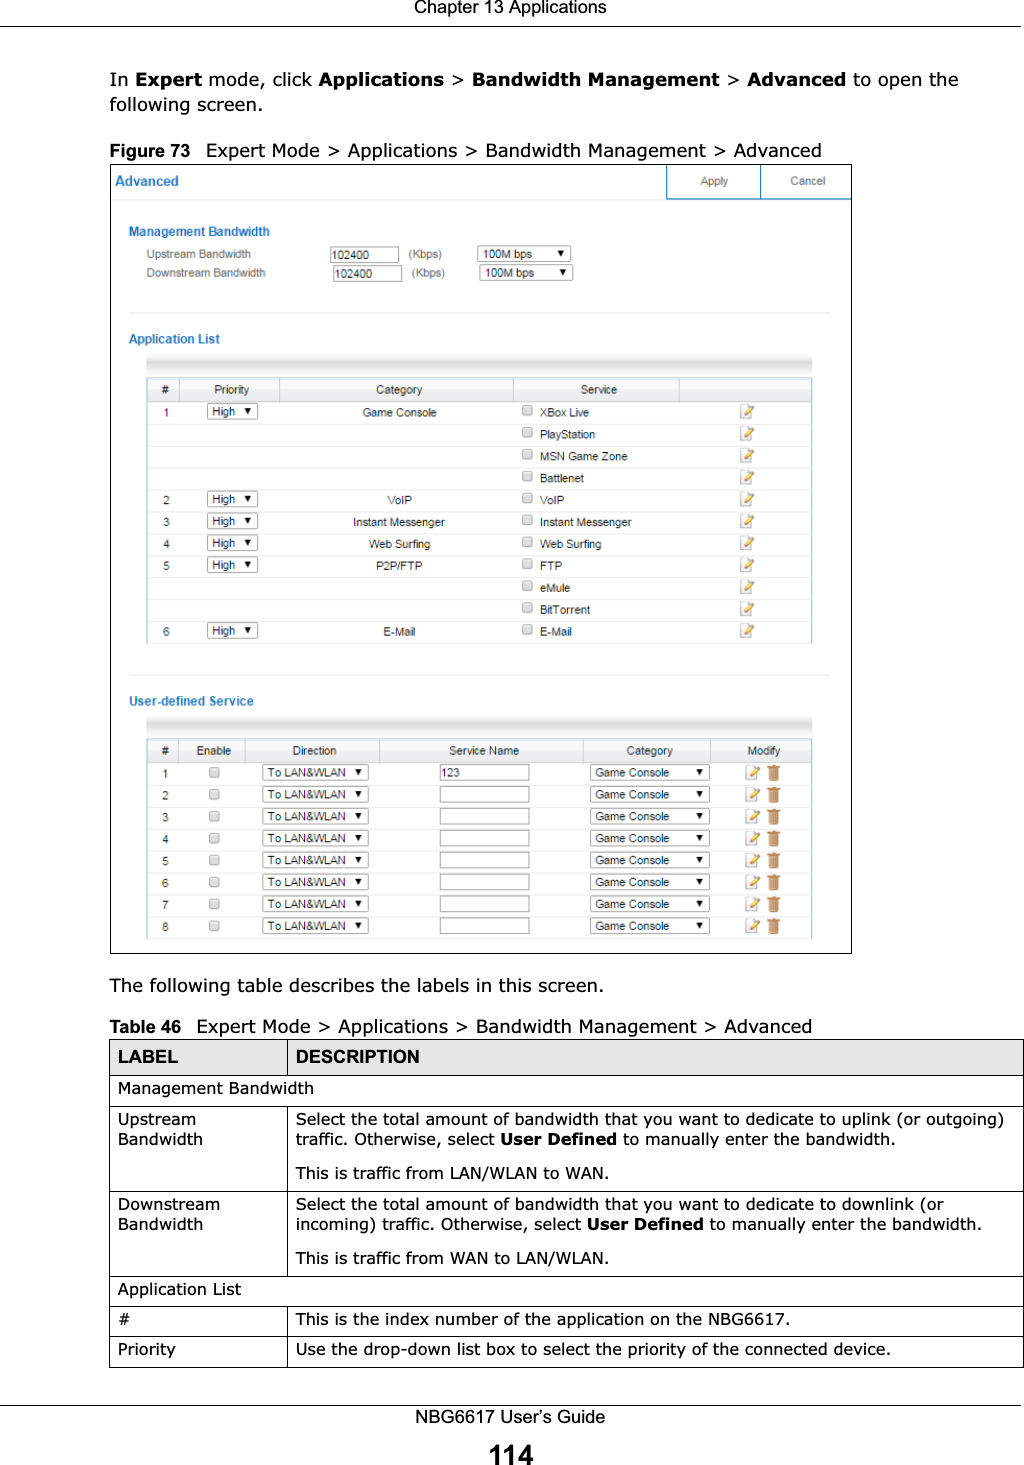 Chapter 13 ApplicationsNBG6617 User’s Guide114In Expert mode, click Applications &gt; Bandwidth Management &gt; Advanced to open the following screen.Figure 73   Expert Mode &gt; Applications &gt; Bandwidth Management &gt; Advanced The following table describes the labels in this screen.Table 46   Expert Mode &gt; Applications &gt; Bandwidth Management &gt; AdvancedLABEL DESCRIPTIONManagement BandwidthUpstream BandwidthSelect the total amount of bandwidth that you want to dedicate to uplink (or outgoing) traffic. Otherwise, select User Defined to manually enter the bandwidth.This is traffic from LAN/WLAN to WAN.Downstream Bandwidth  Select the total amount of bandwidth that you want to dedicate to downlink (or incoming) traffic. Otherwise, select User Defined to manually enter the bandwidth.This is traffic from WAN to LAN/WLAN.Application List#This is the index number of the application on the NBG6617.Priority Use the drop-down list box to select the priority of the connected device.